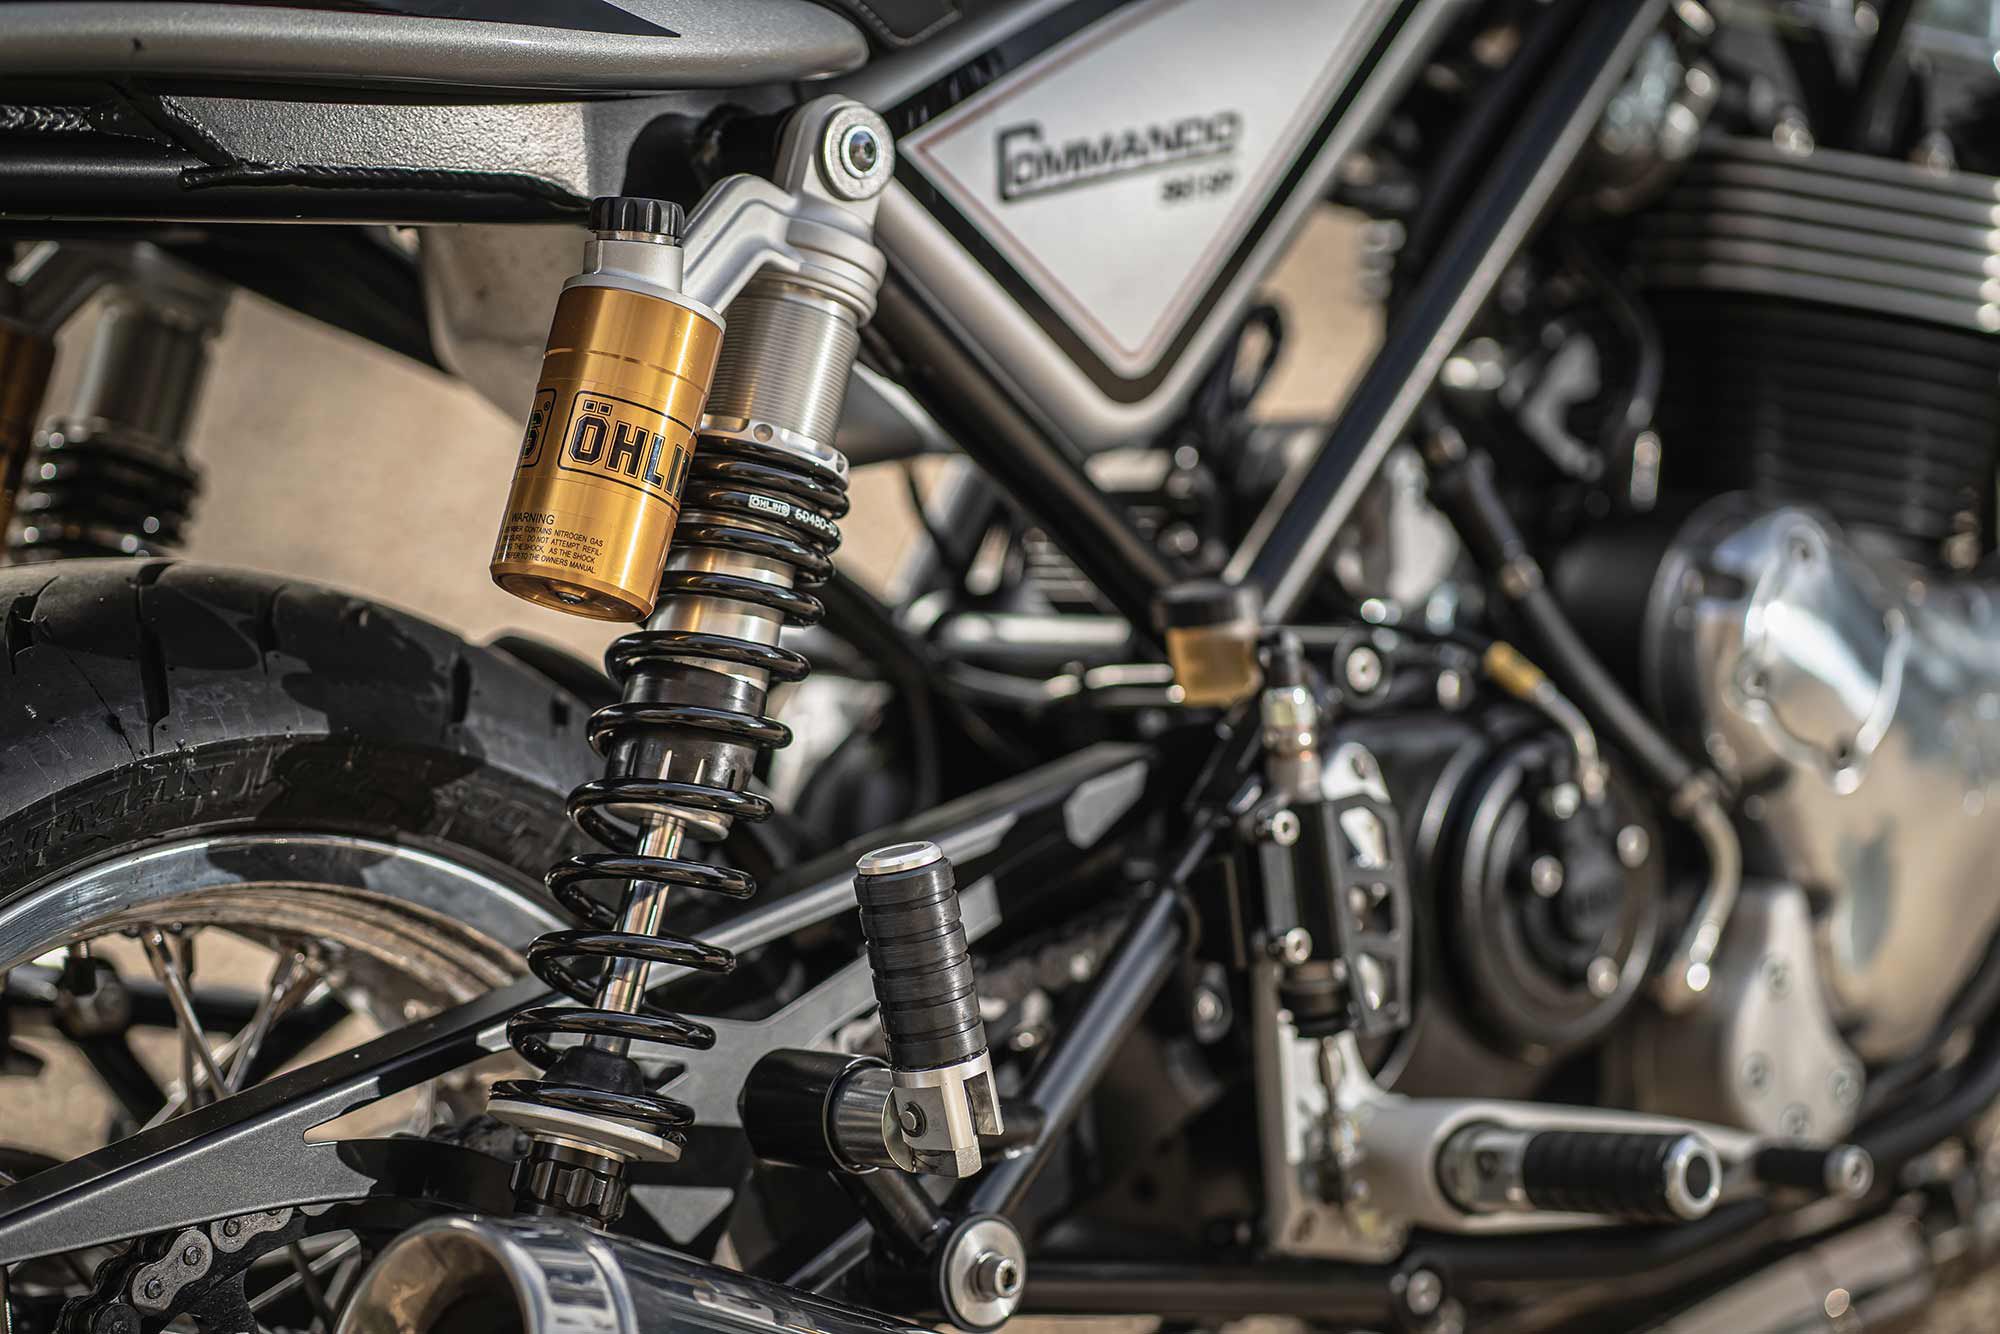 Norton has continued to use manually adjustable Öhlins suspension front and rear, with 43mm inverted fork up front and fully adjustable, traditional twin shocks at the rear.